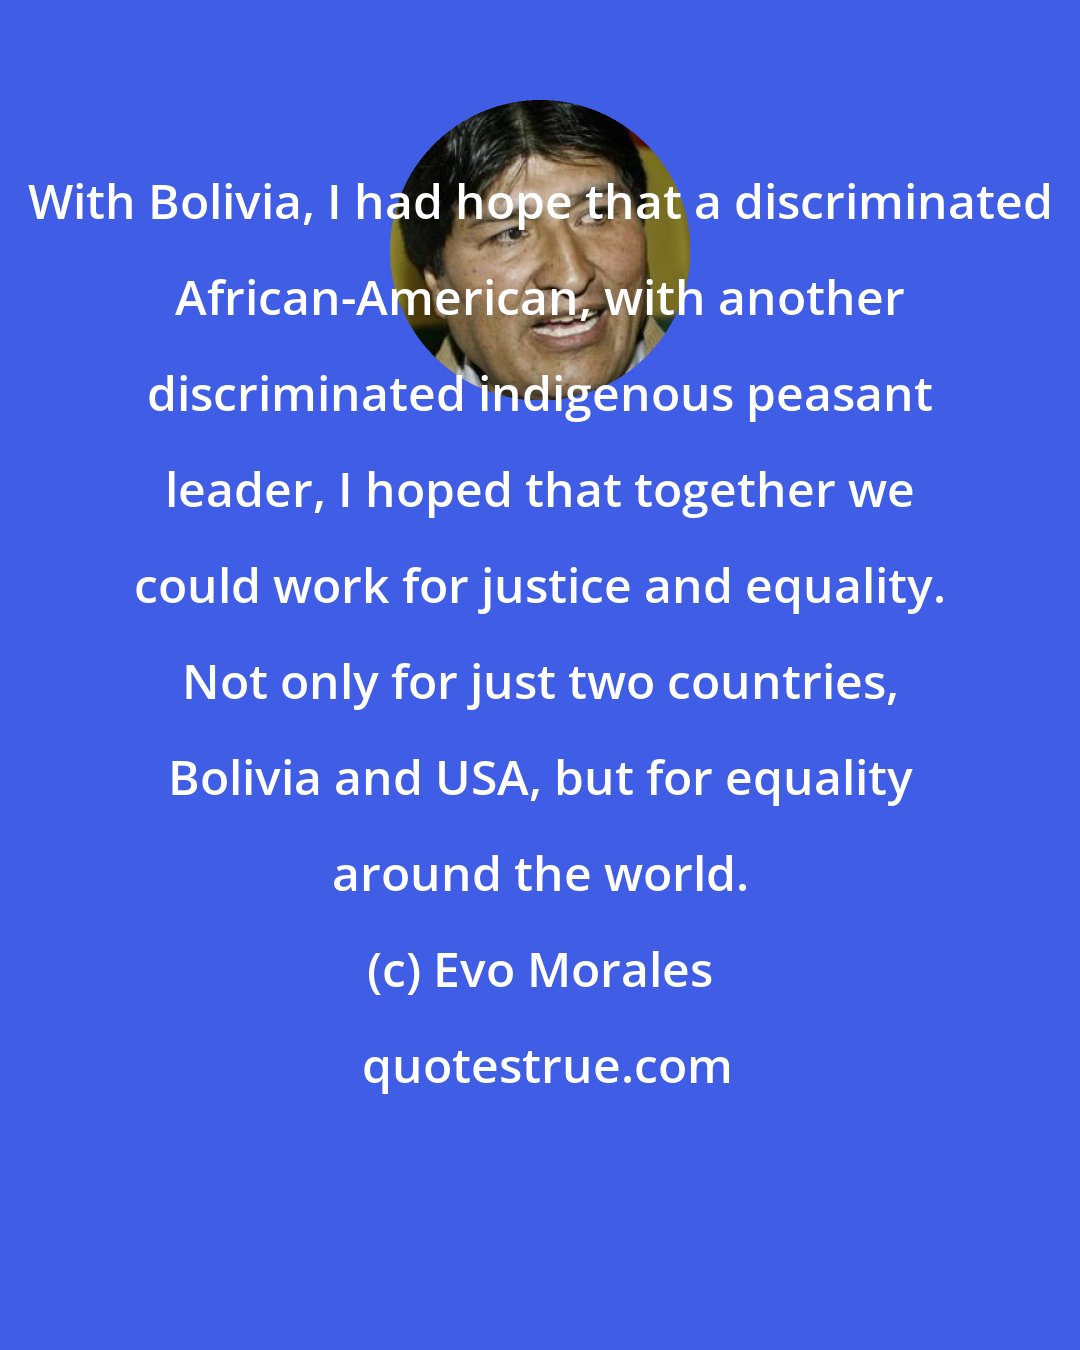 Evo Morales: With Bolivia, I had hope that a discriminated African-American, with another discriminated indigenous peasant leader, I hoped that together we could work for justice and equality. Not only for just two countries, Bolivia and USA, but for equality around the world.